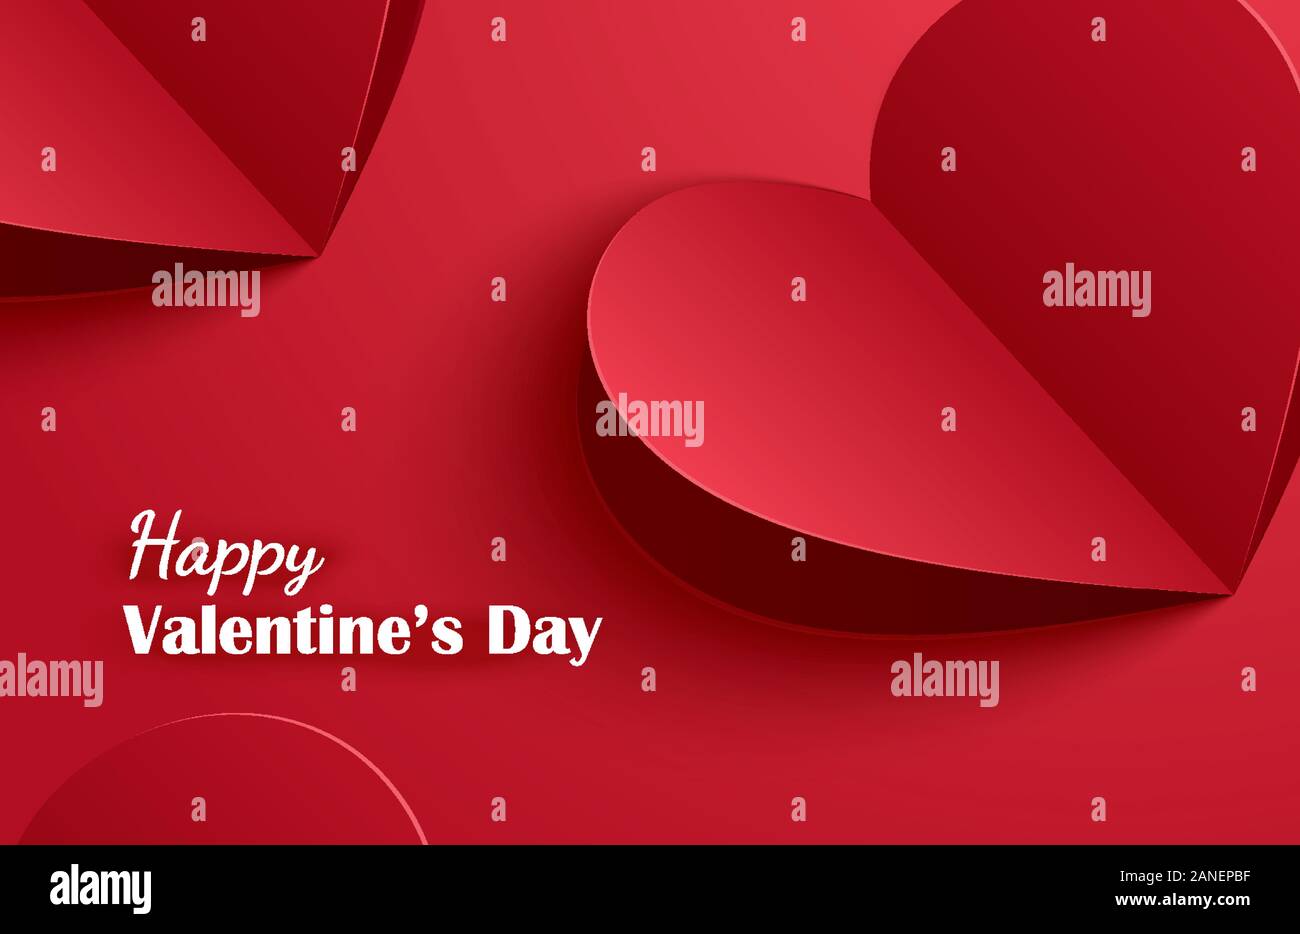 Valentine day greeting card cut out paper hearts vector image on  VectorStock  Hearts paper crafts, Valentines day greetings, Valentine's  day greeting cards